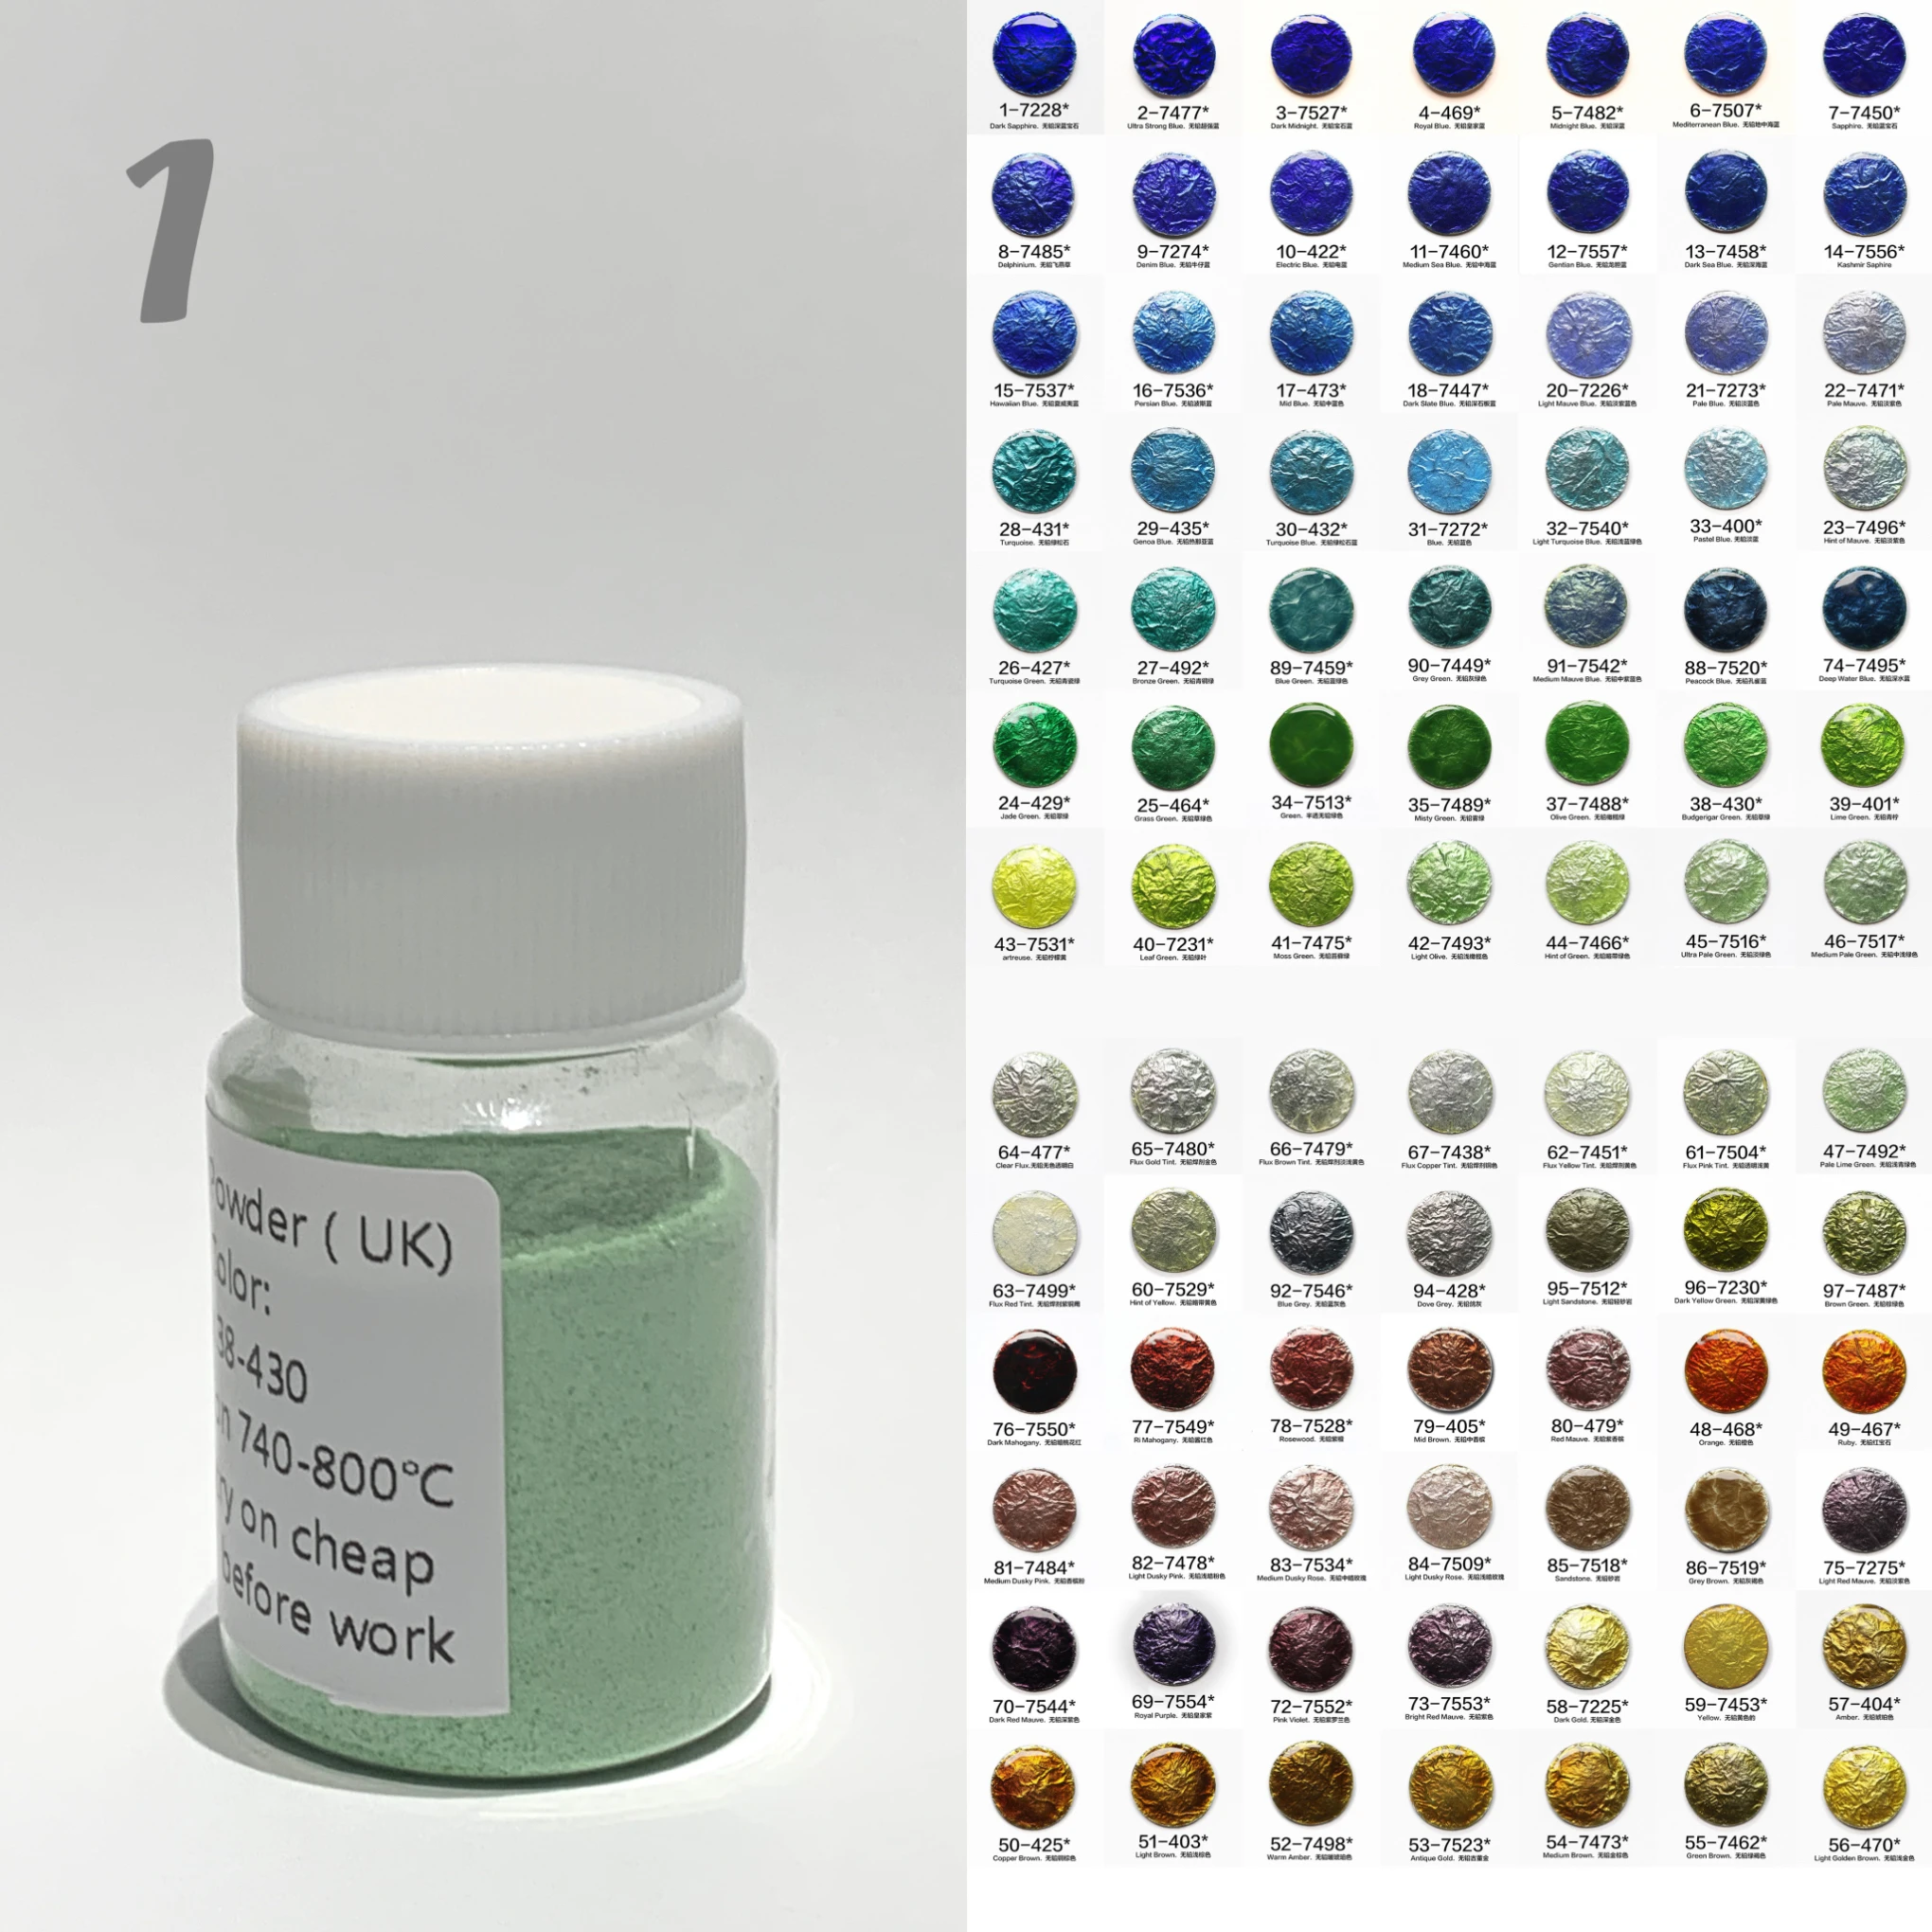 

Enamel Powder(UK), 30g, Translucent Colors for Jewelry Art Decoration, Natural Material, baking on 740-800℃,(link 1)